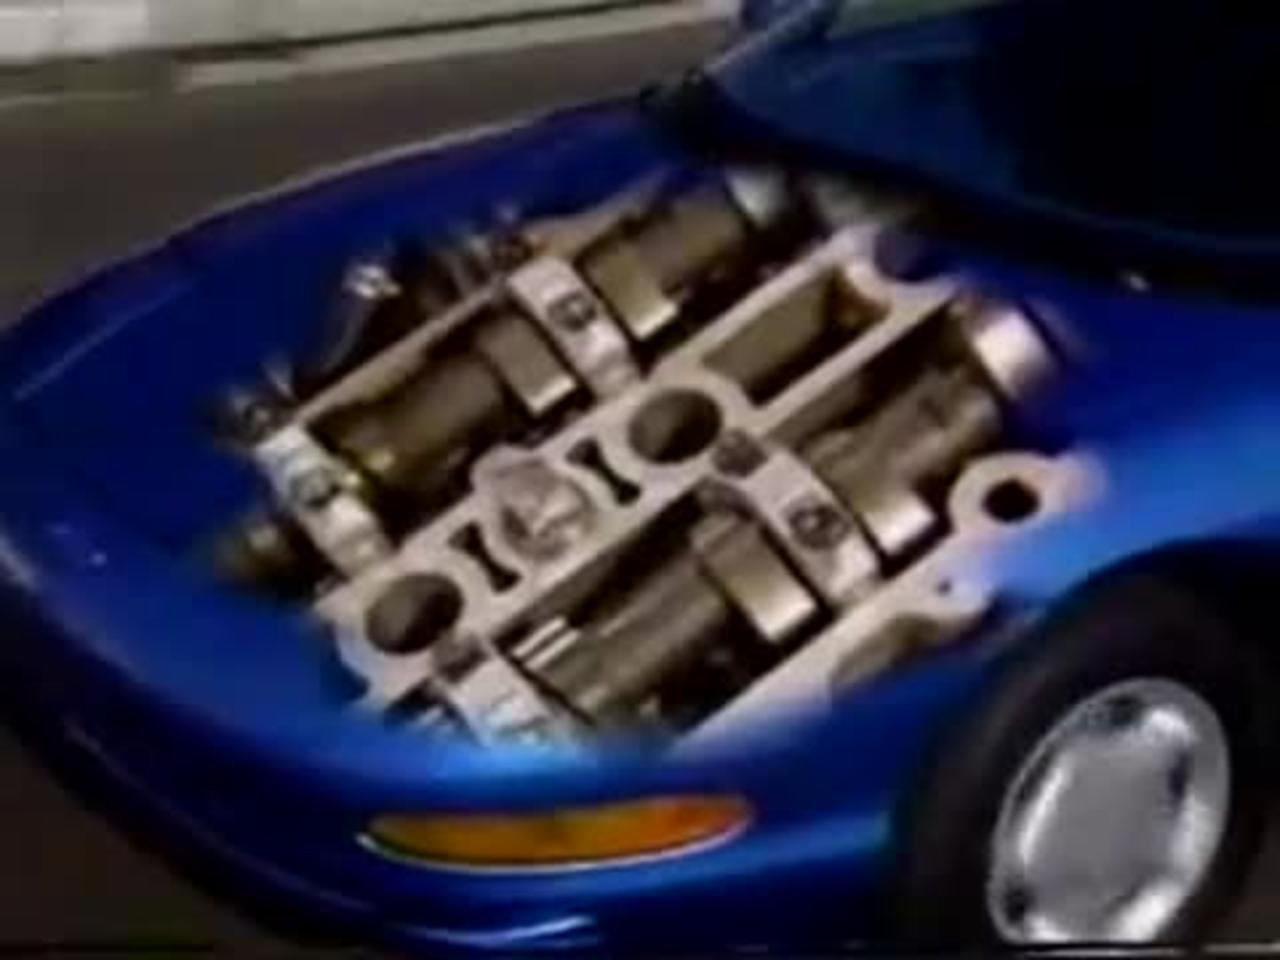 1993 Ford Probe Introduction- Dealer Training Video Loved the Probes